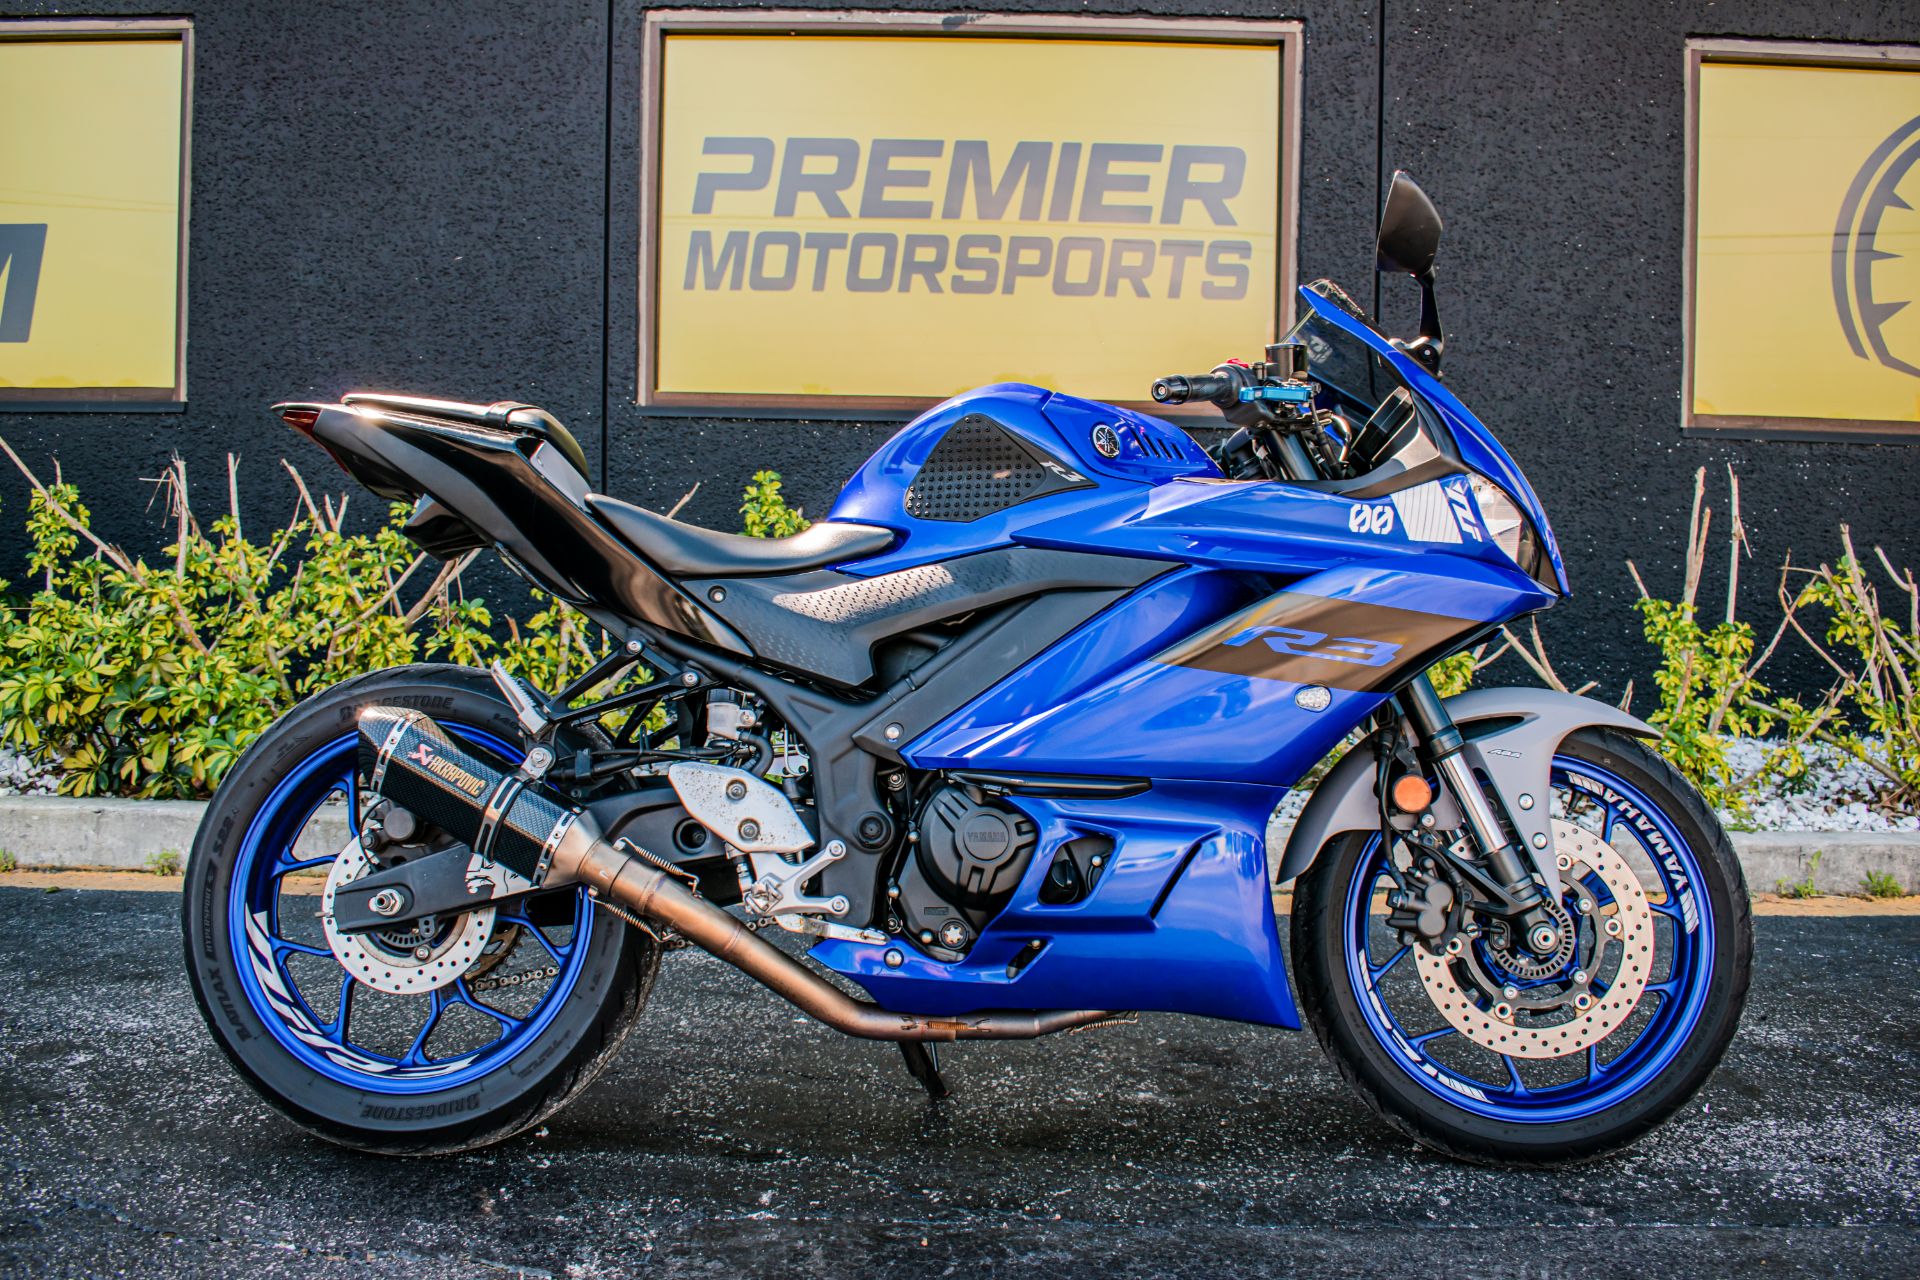 2021 Yamaha YZF-R3 ABS in Jacksonville, Florida - Photo 1